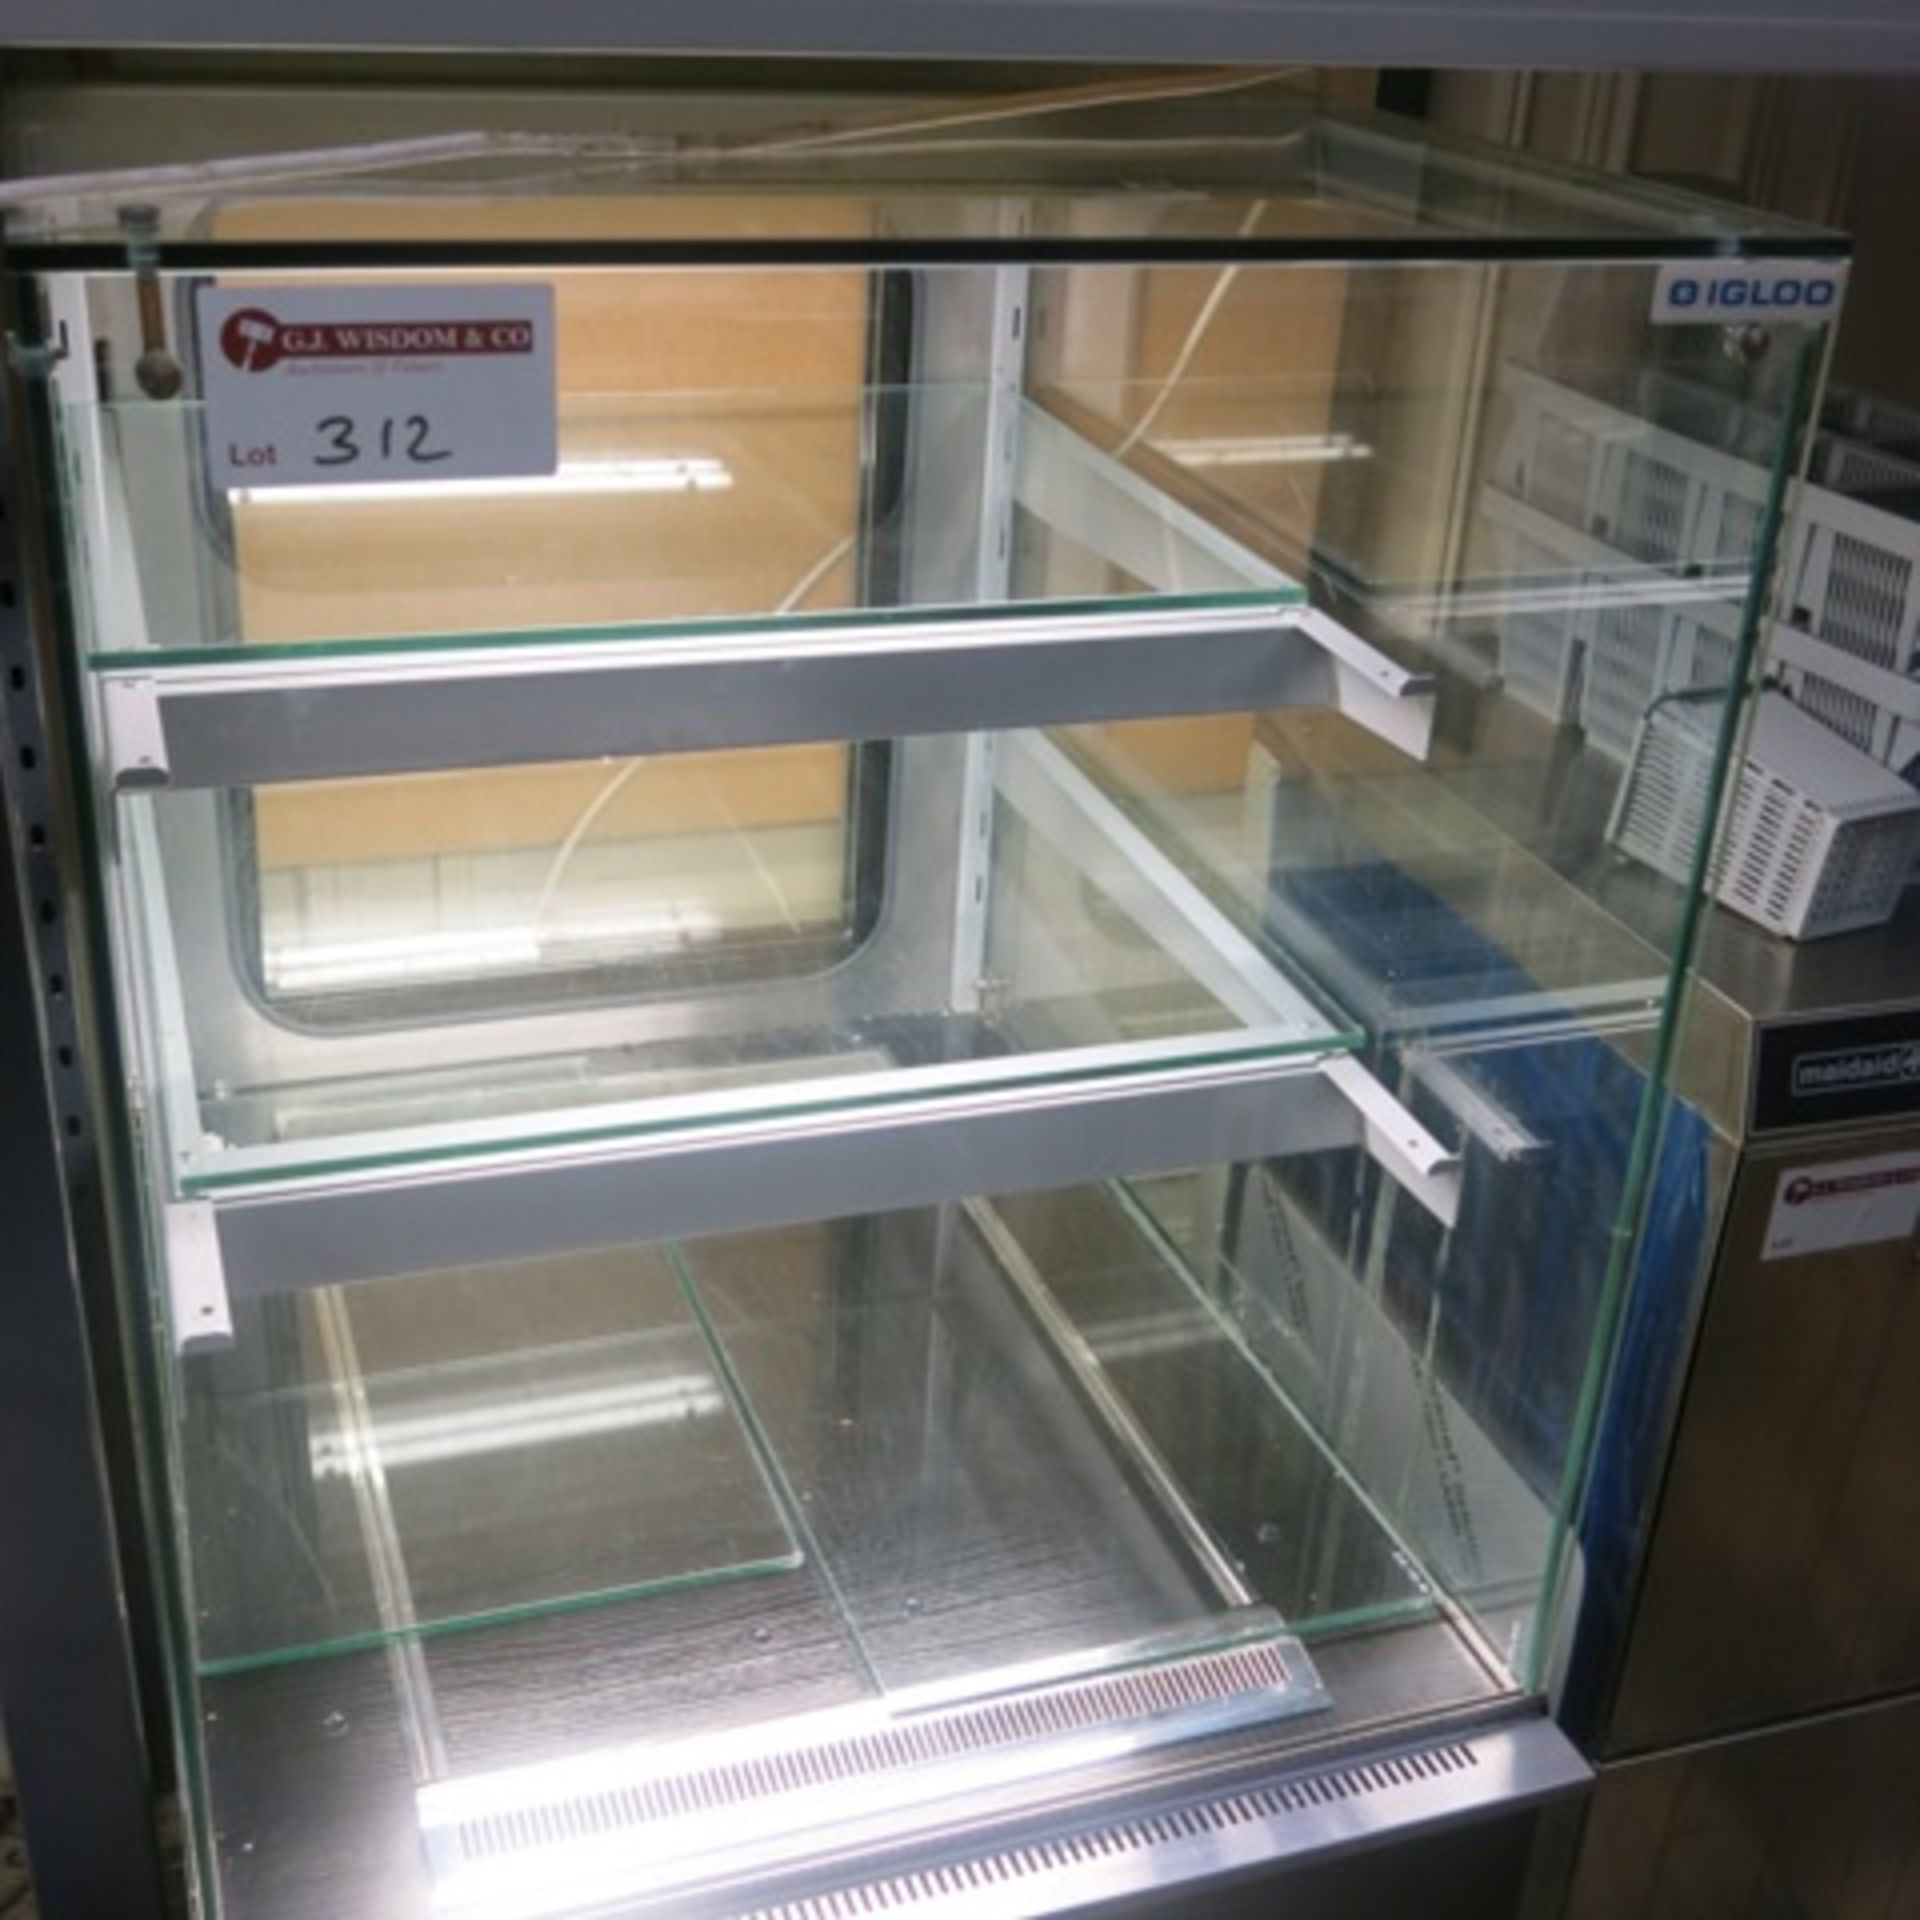 Igloo Refrigerated Glass Display Cabinet with 2 Glass Shelves, Model Gastroline Cube 0.6W. Size (H)